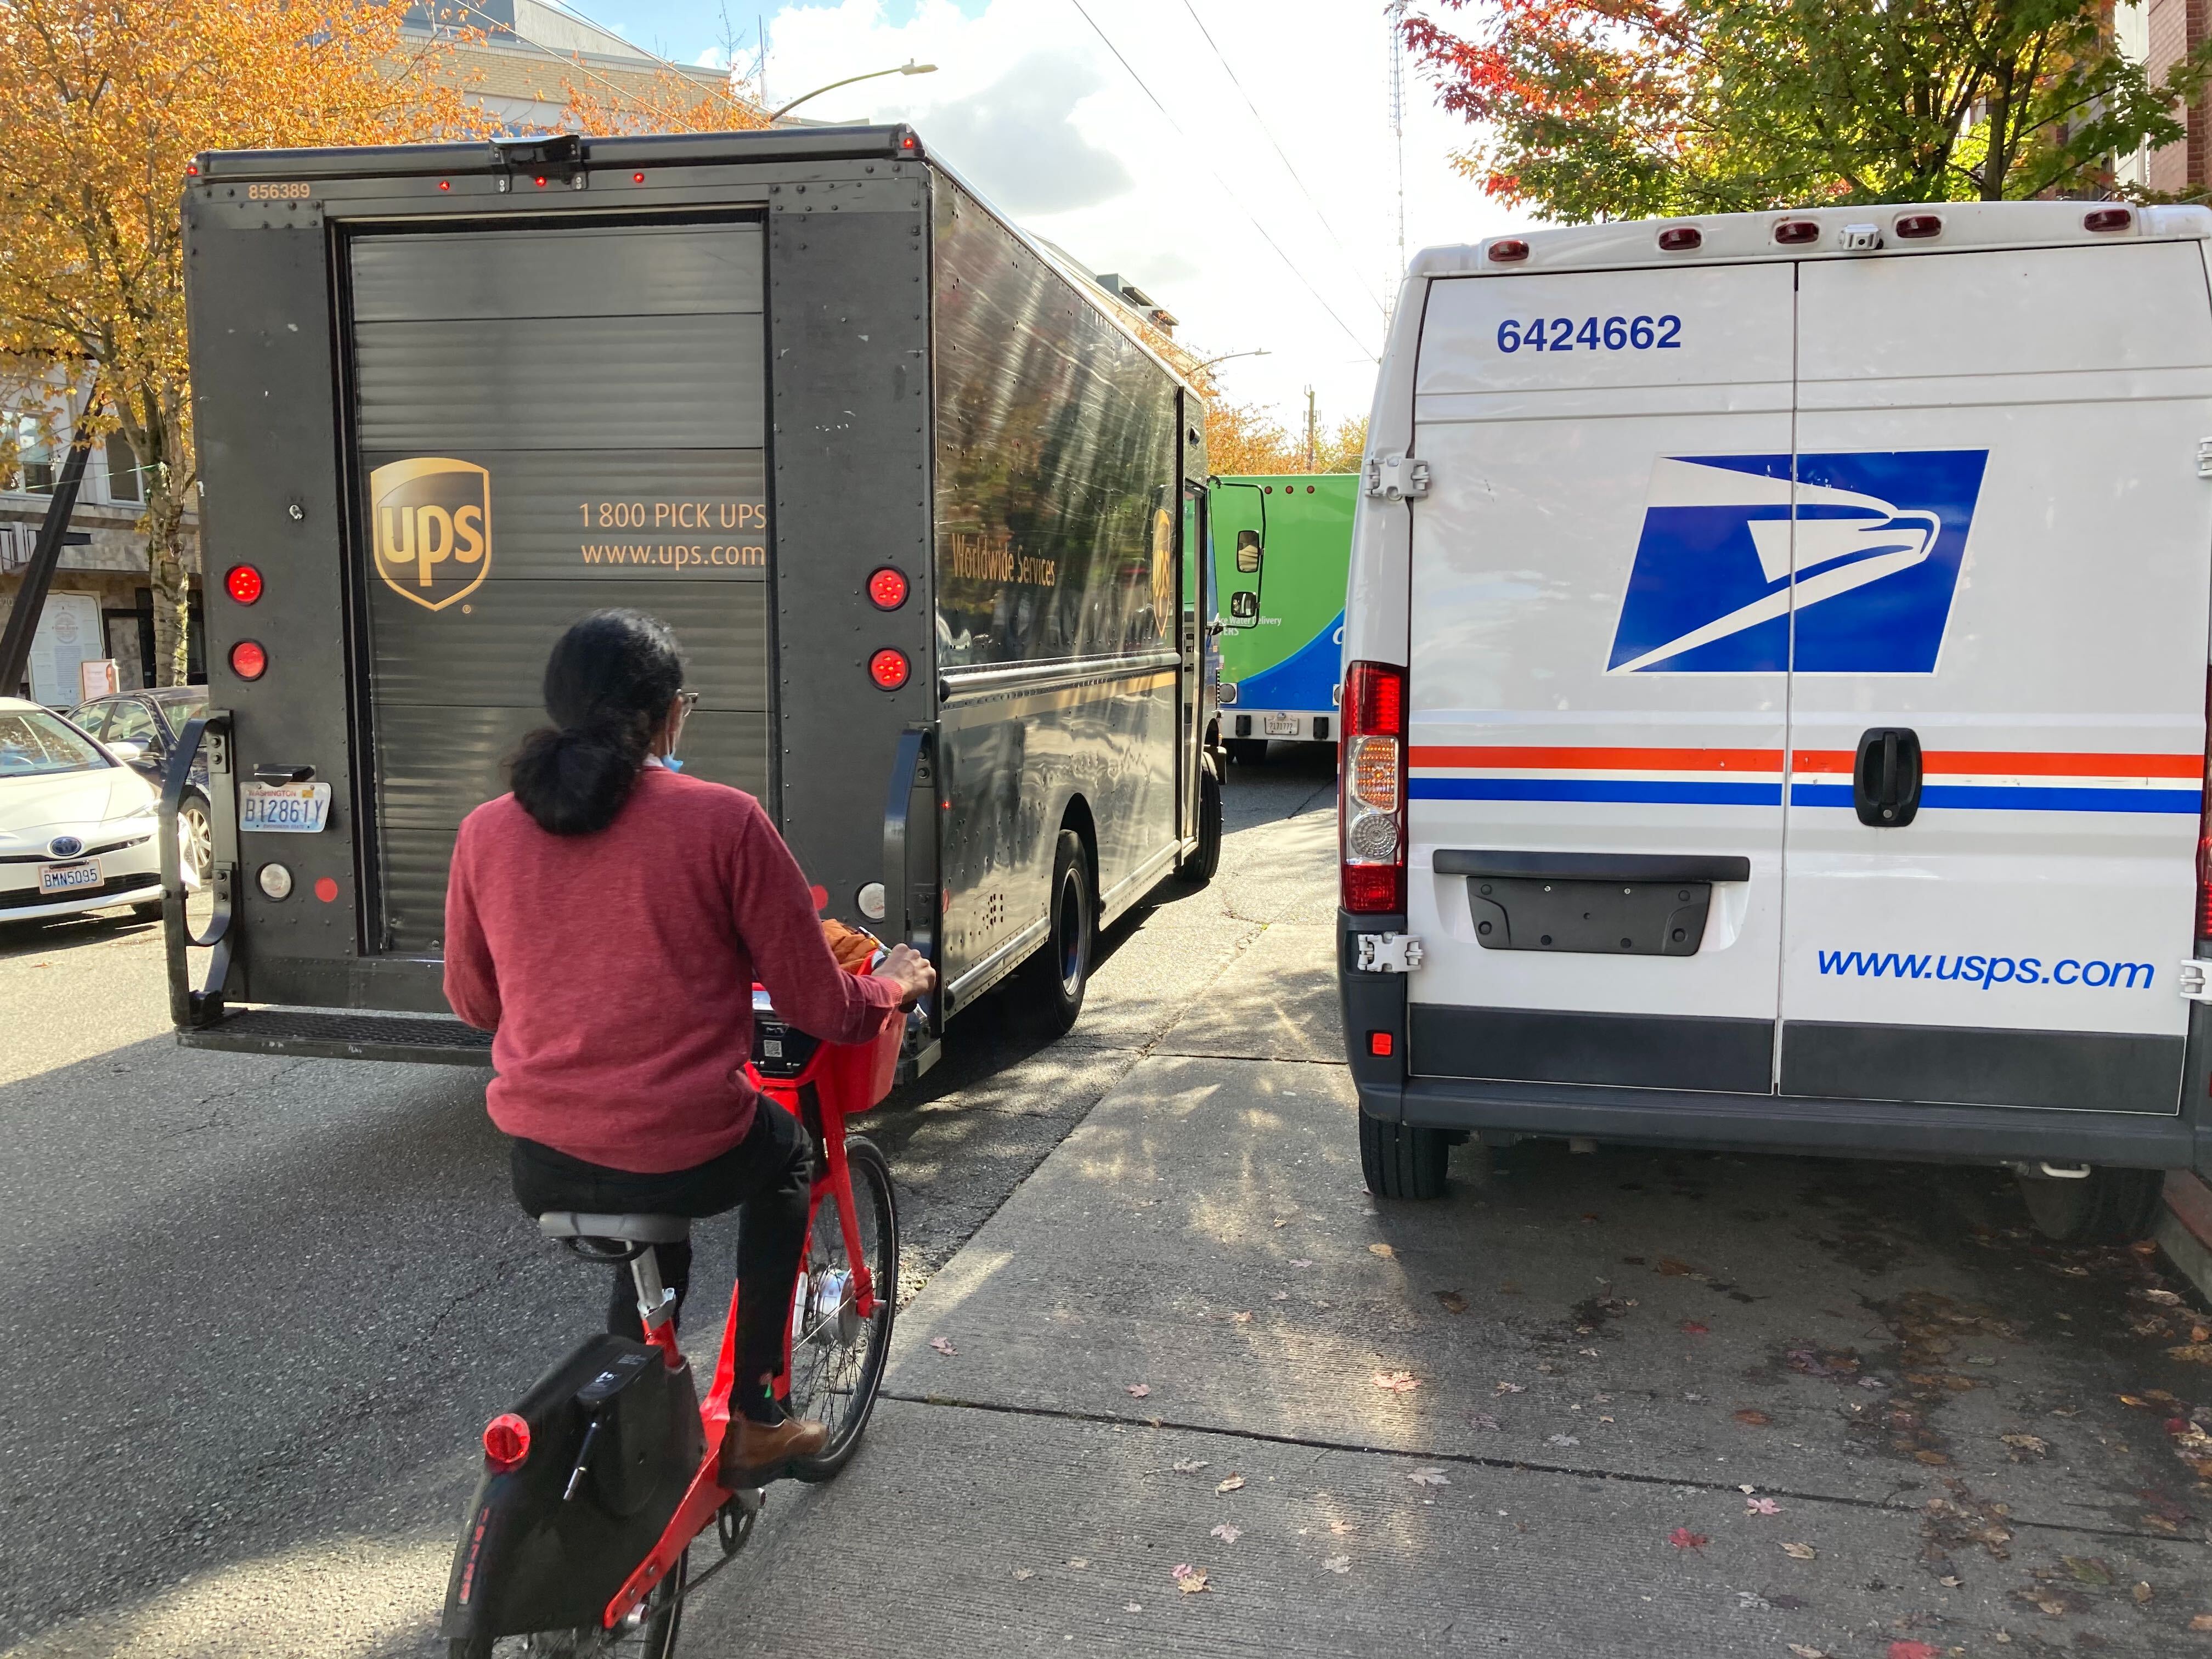 Conflict between shared mobility and delivery